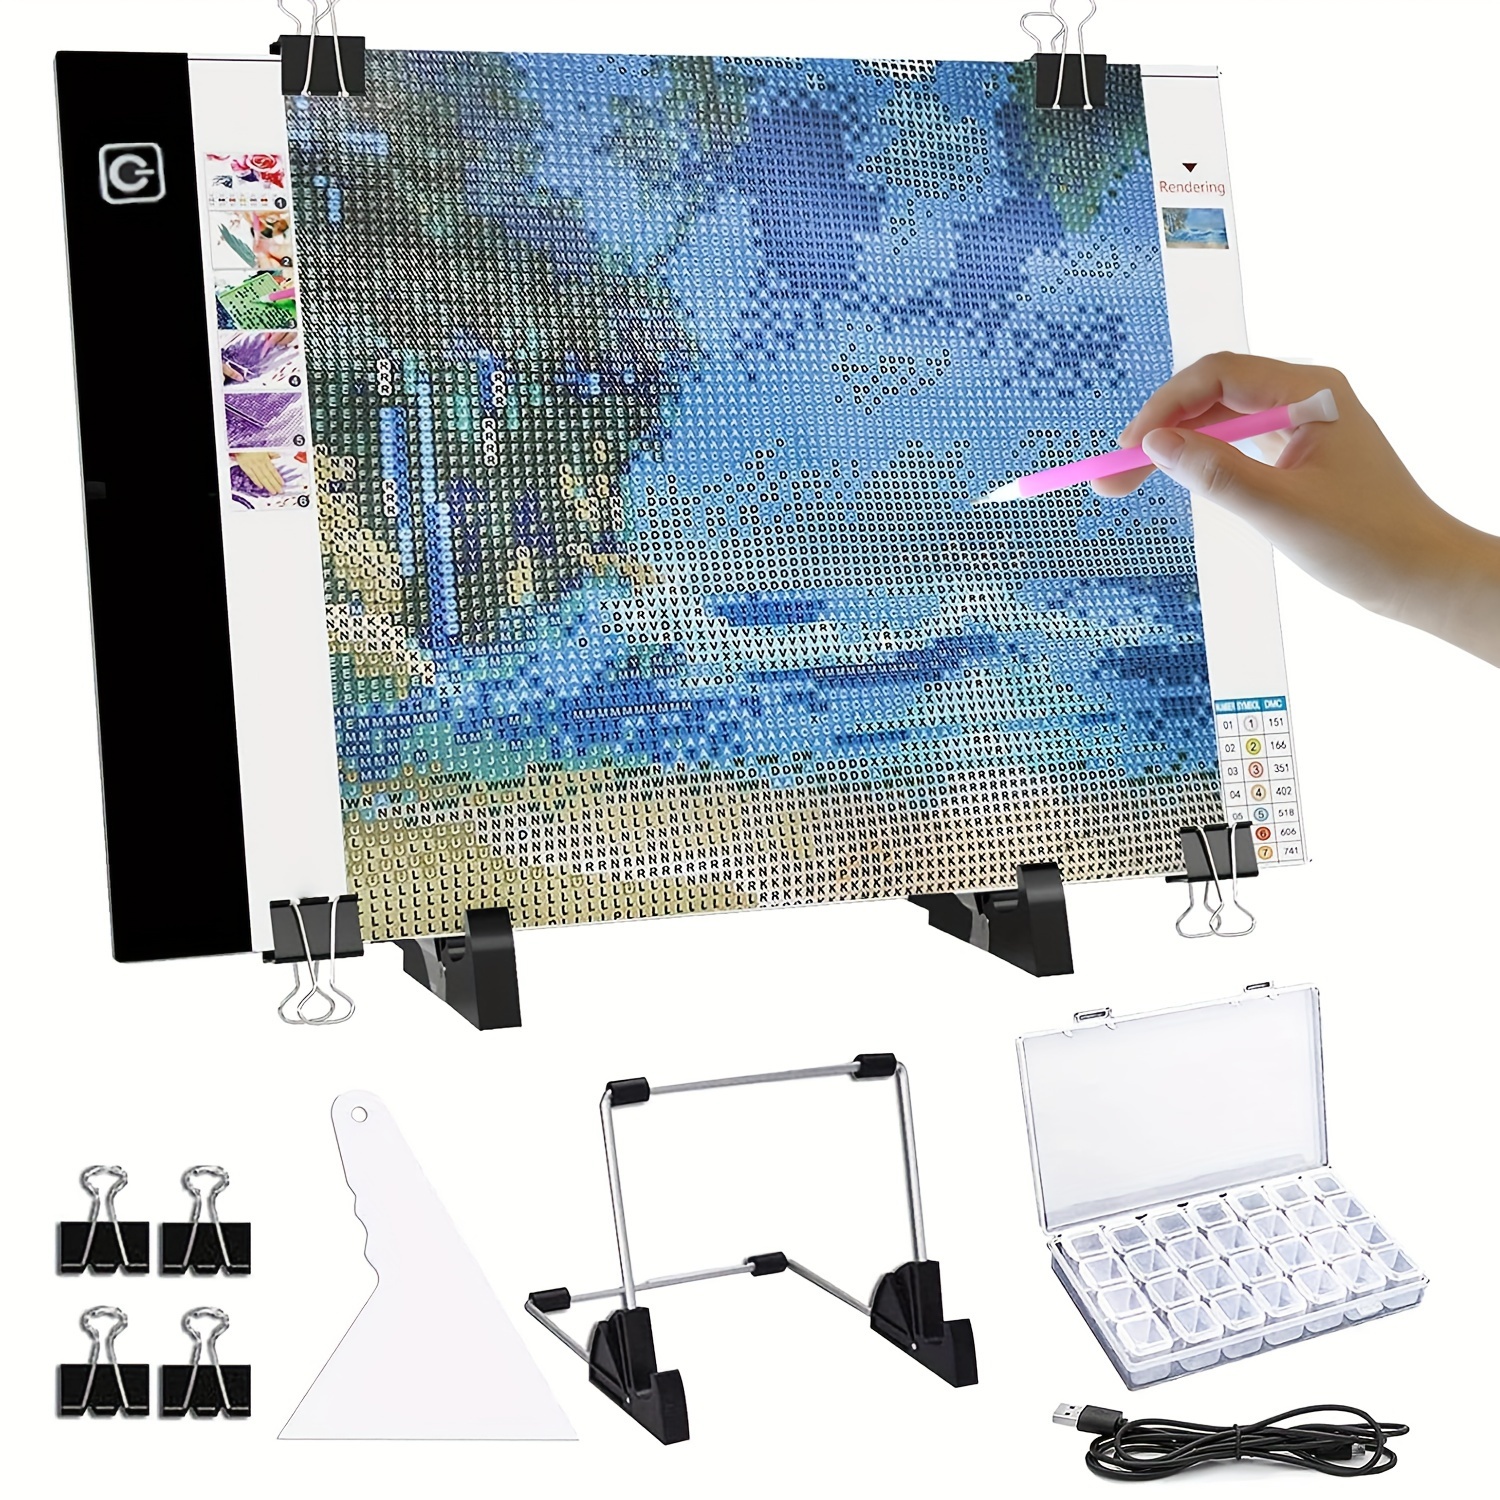 

A2/a3 Led Light Pad For Diamond Painting, Diamond Art Light Board With 3 Brightness, Tracing Light Board With Usb Cable For Sketching, Animation, Drawing, Diamond Painting Supplies